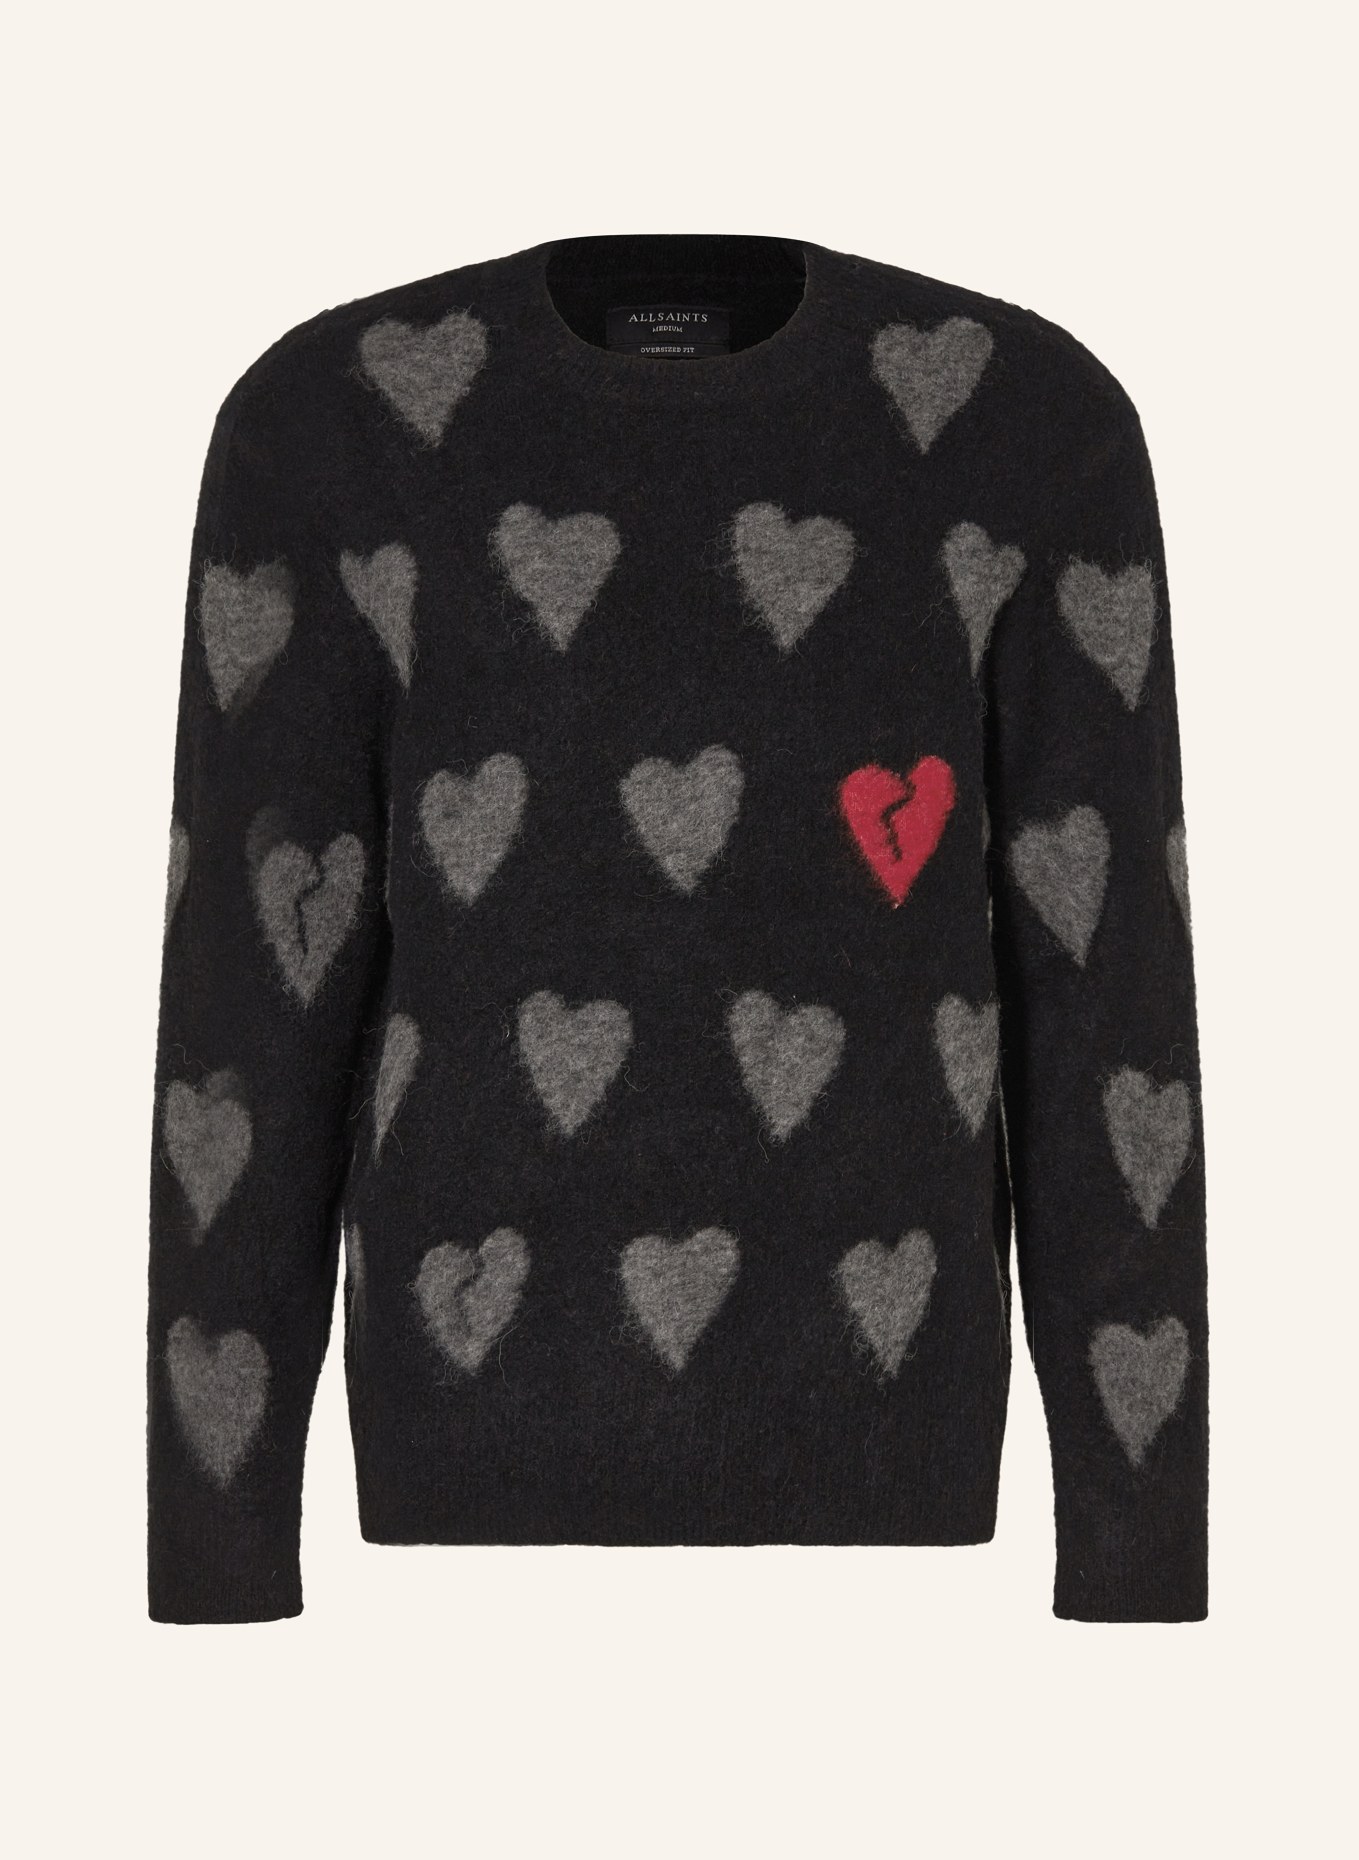 ALLSAINTS Sweater AMORE with alpaca, Color: BLACK/ GRAY (Image 1)